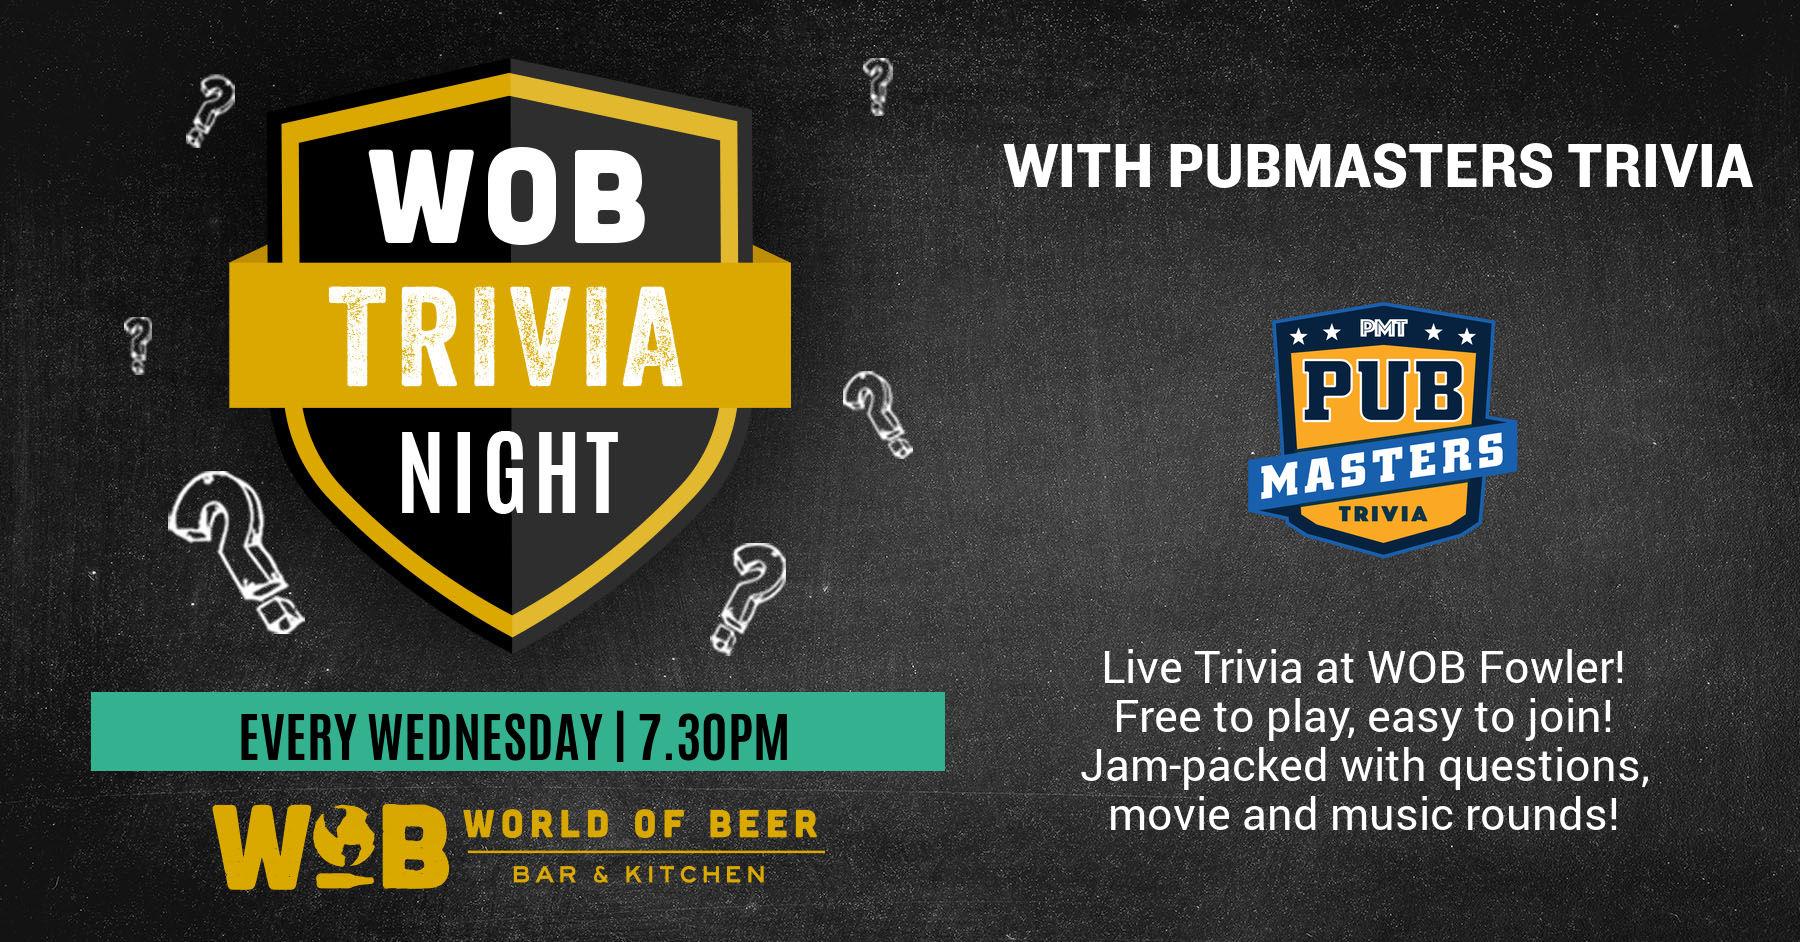 Pub Masters Trivia LIVE at World of Beer - Fowler!